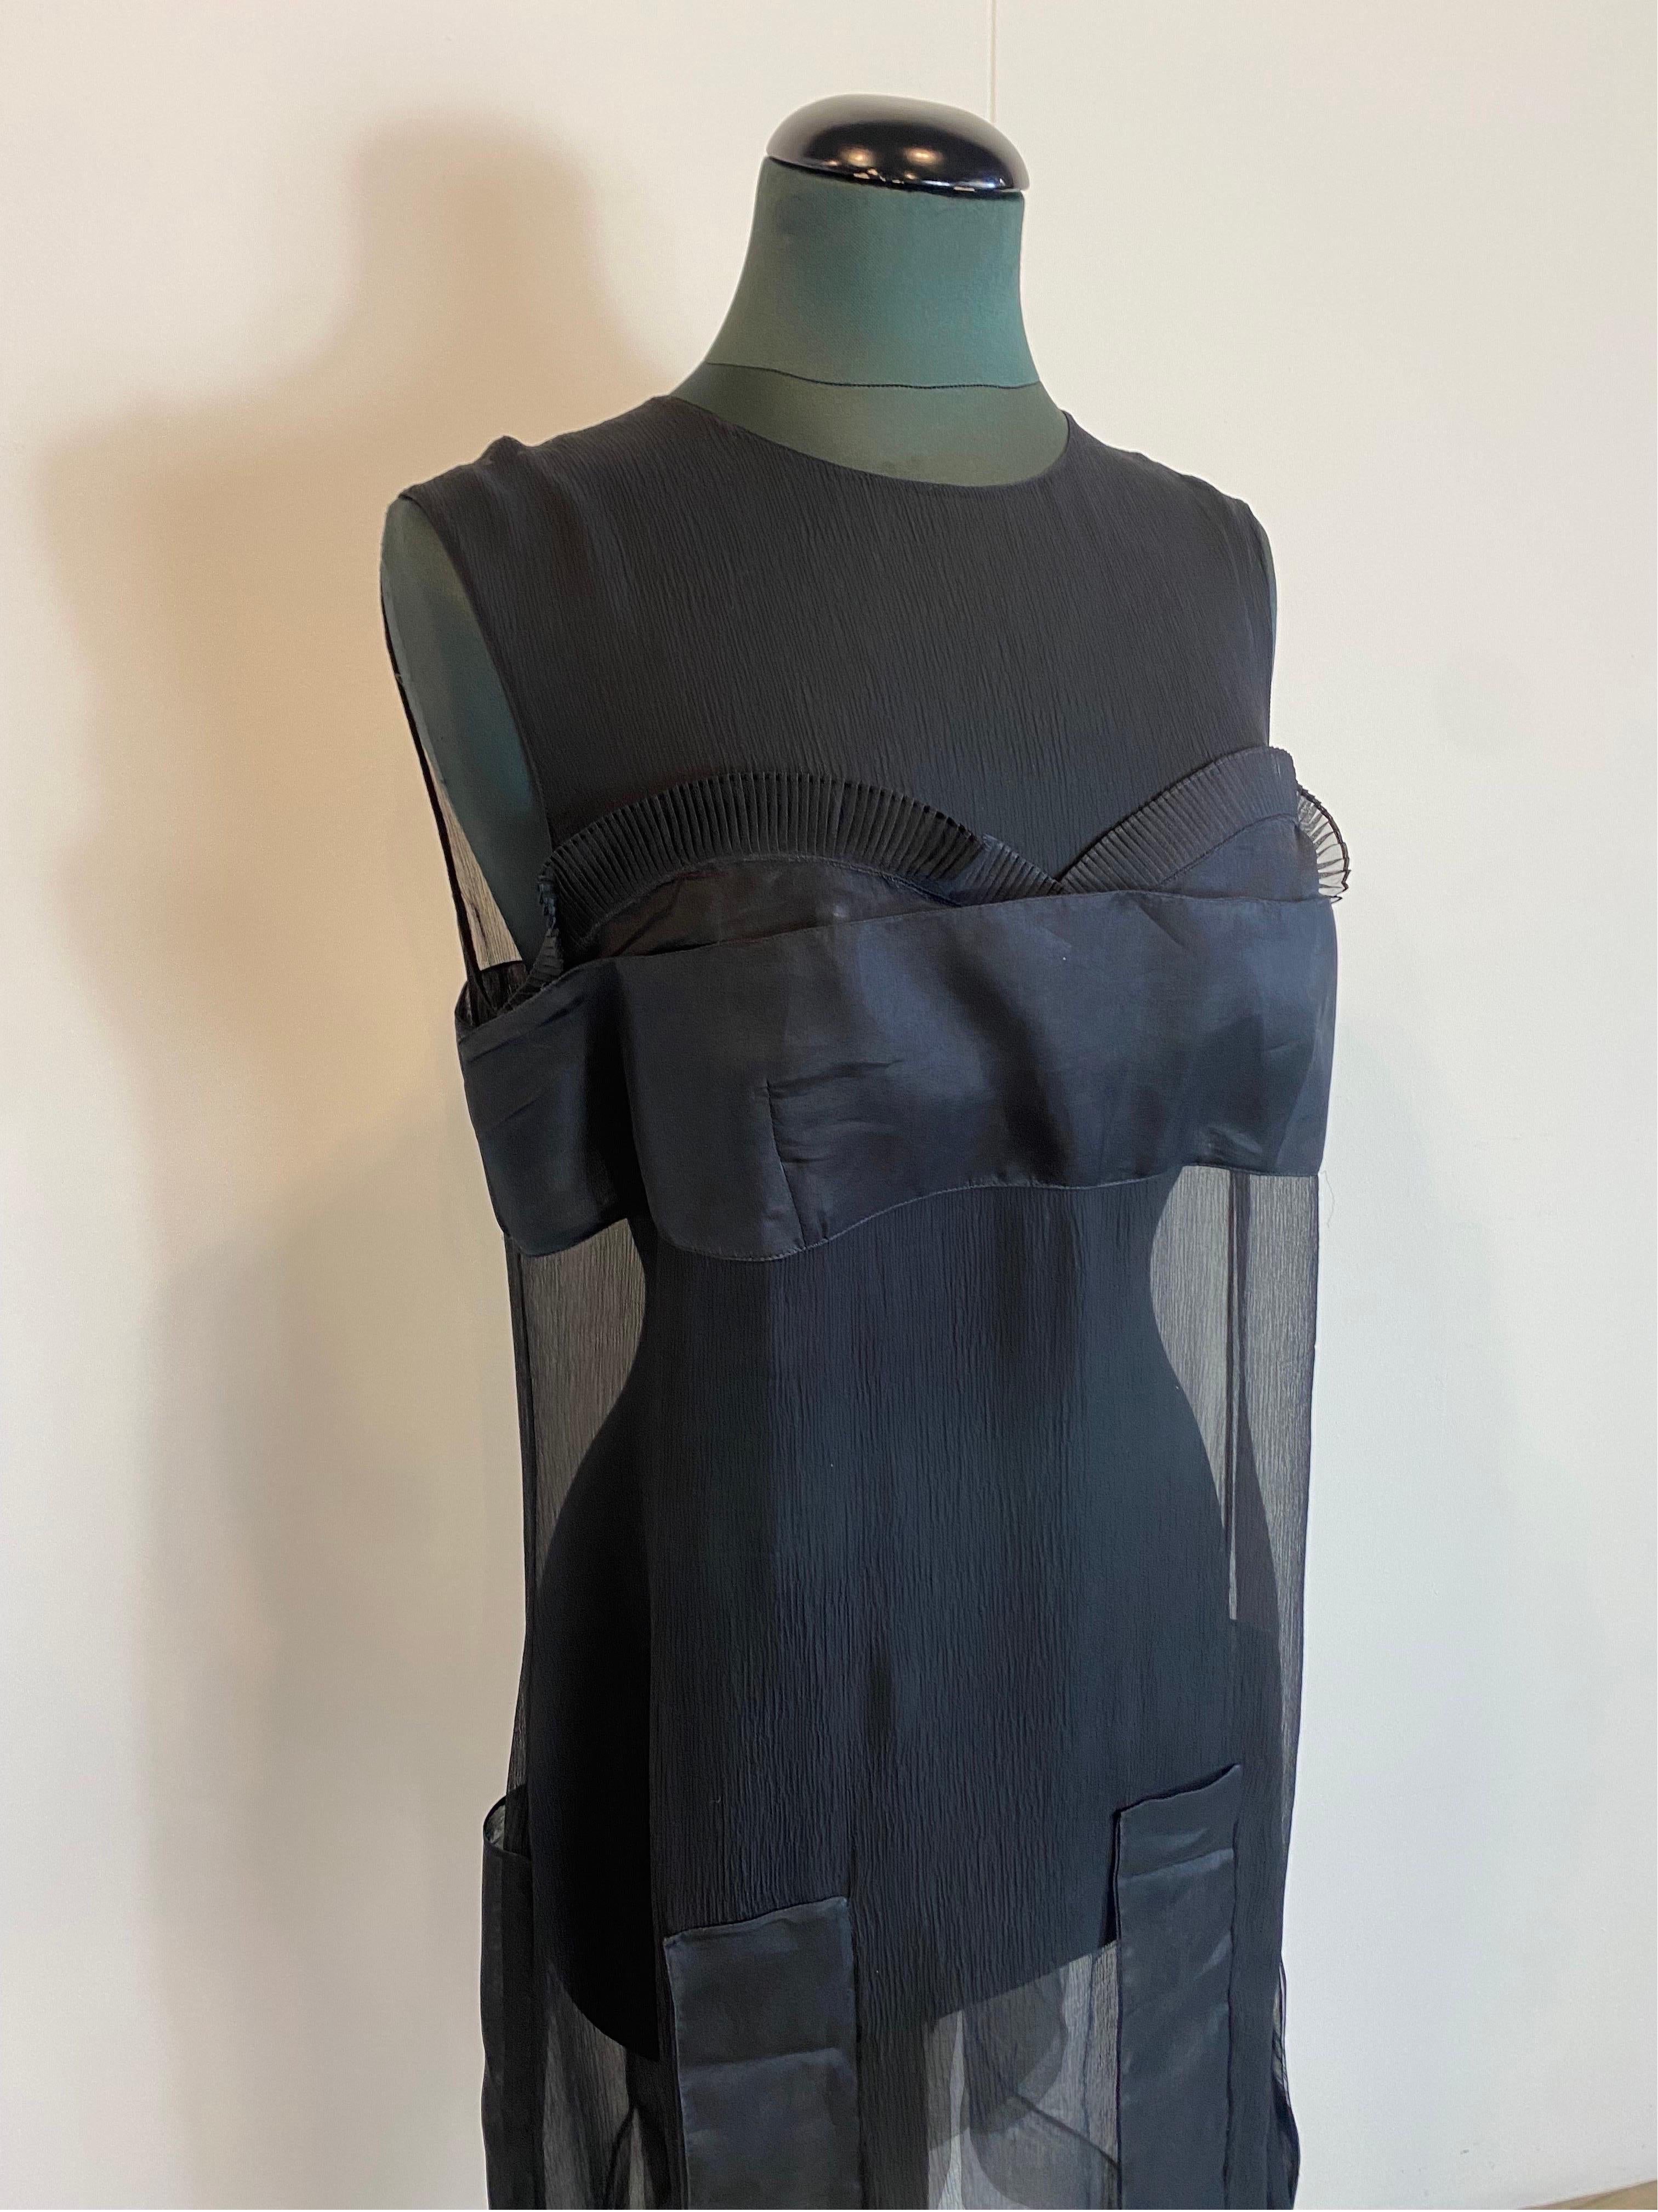 Prada transparent silk dress
In silk, there is no composition label but we think it is silk.
Size not reported but we think it is an Italian 42-44.
Very particular transparent with black satin inserts.
Zip on the back.
Shoulders 37
Length 110
Breast